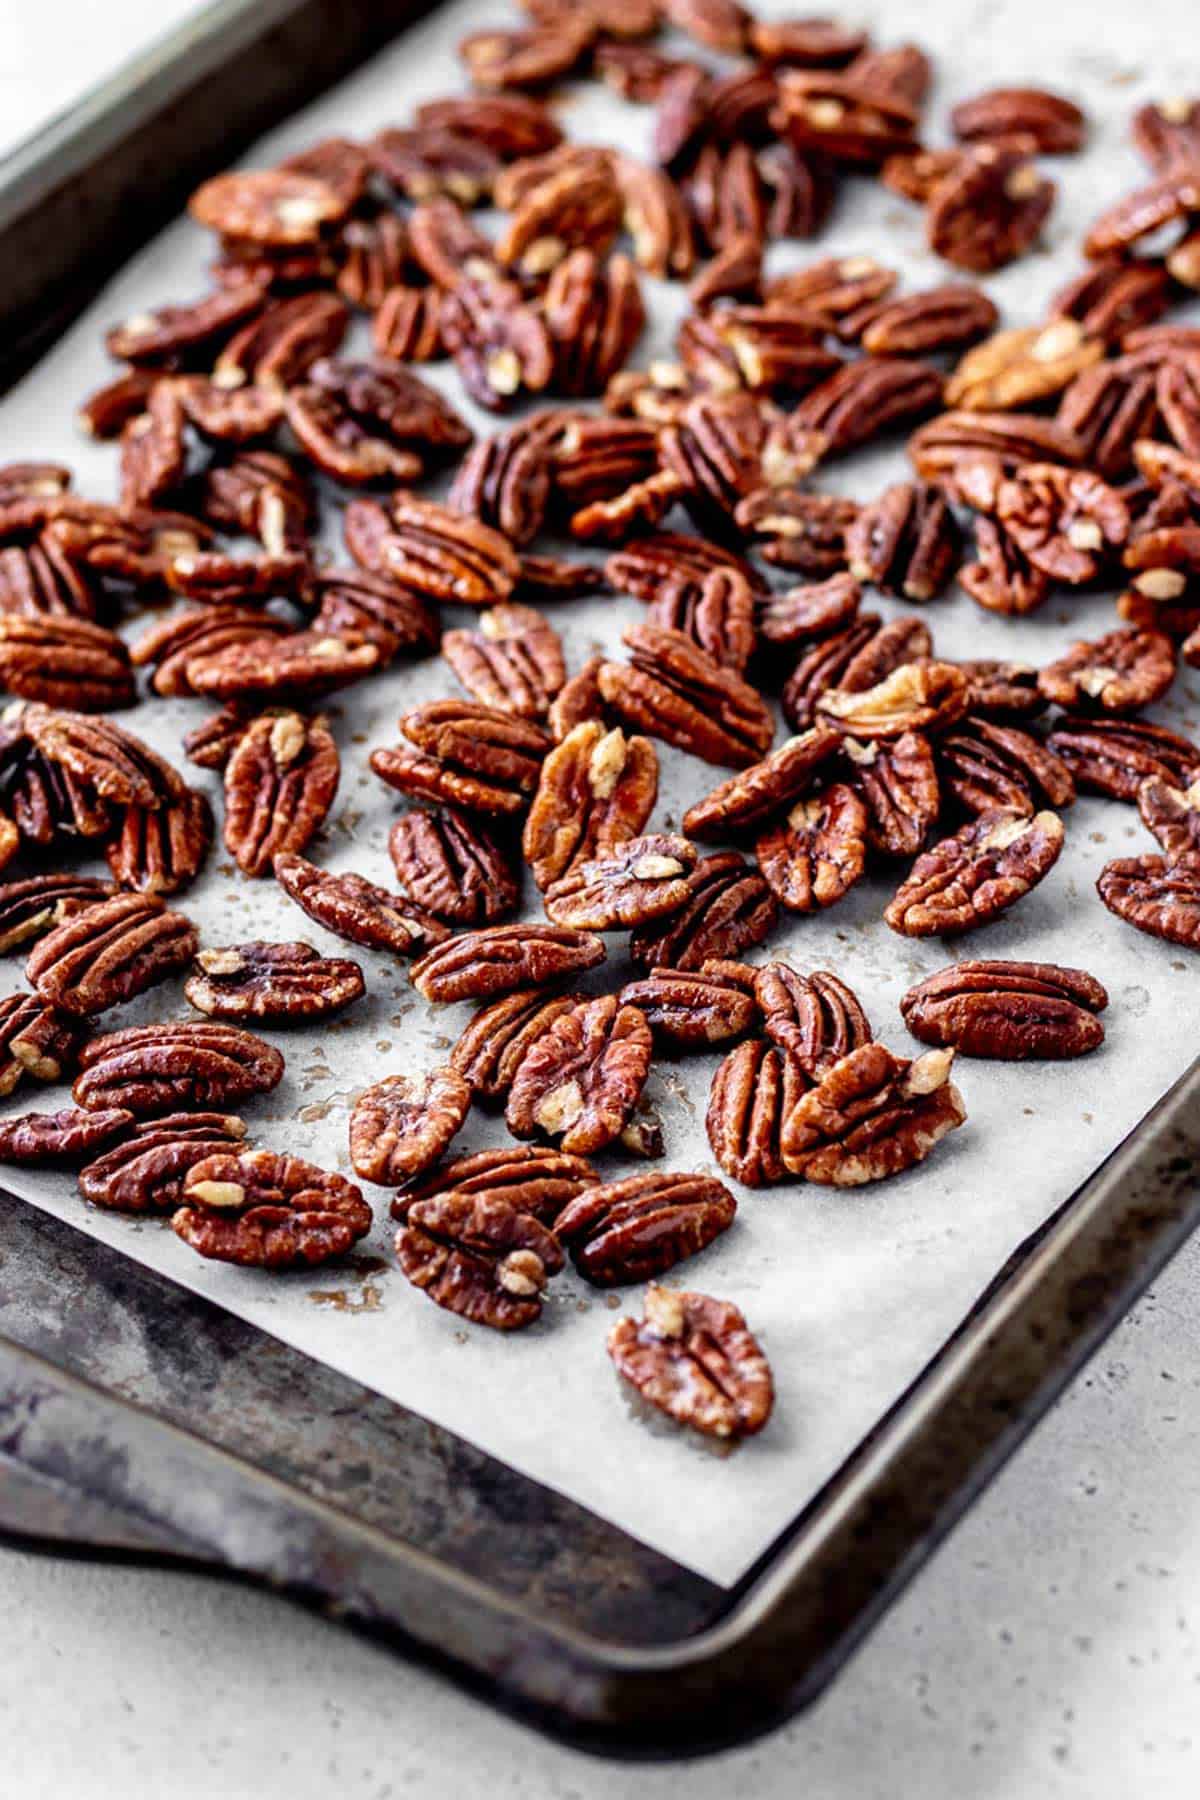 Maple syrup coated pecan halves on a parchment lined baking sheet.